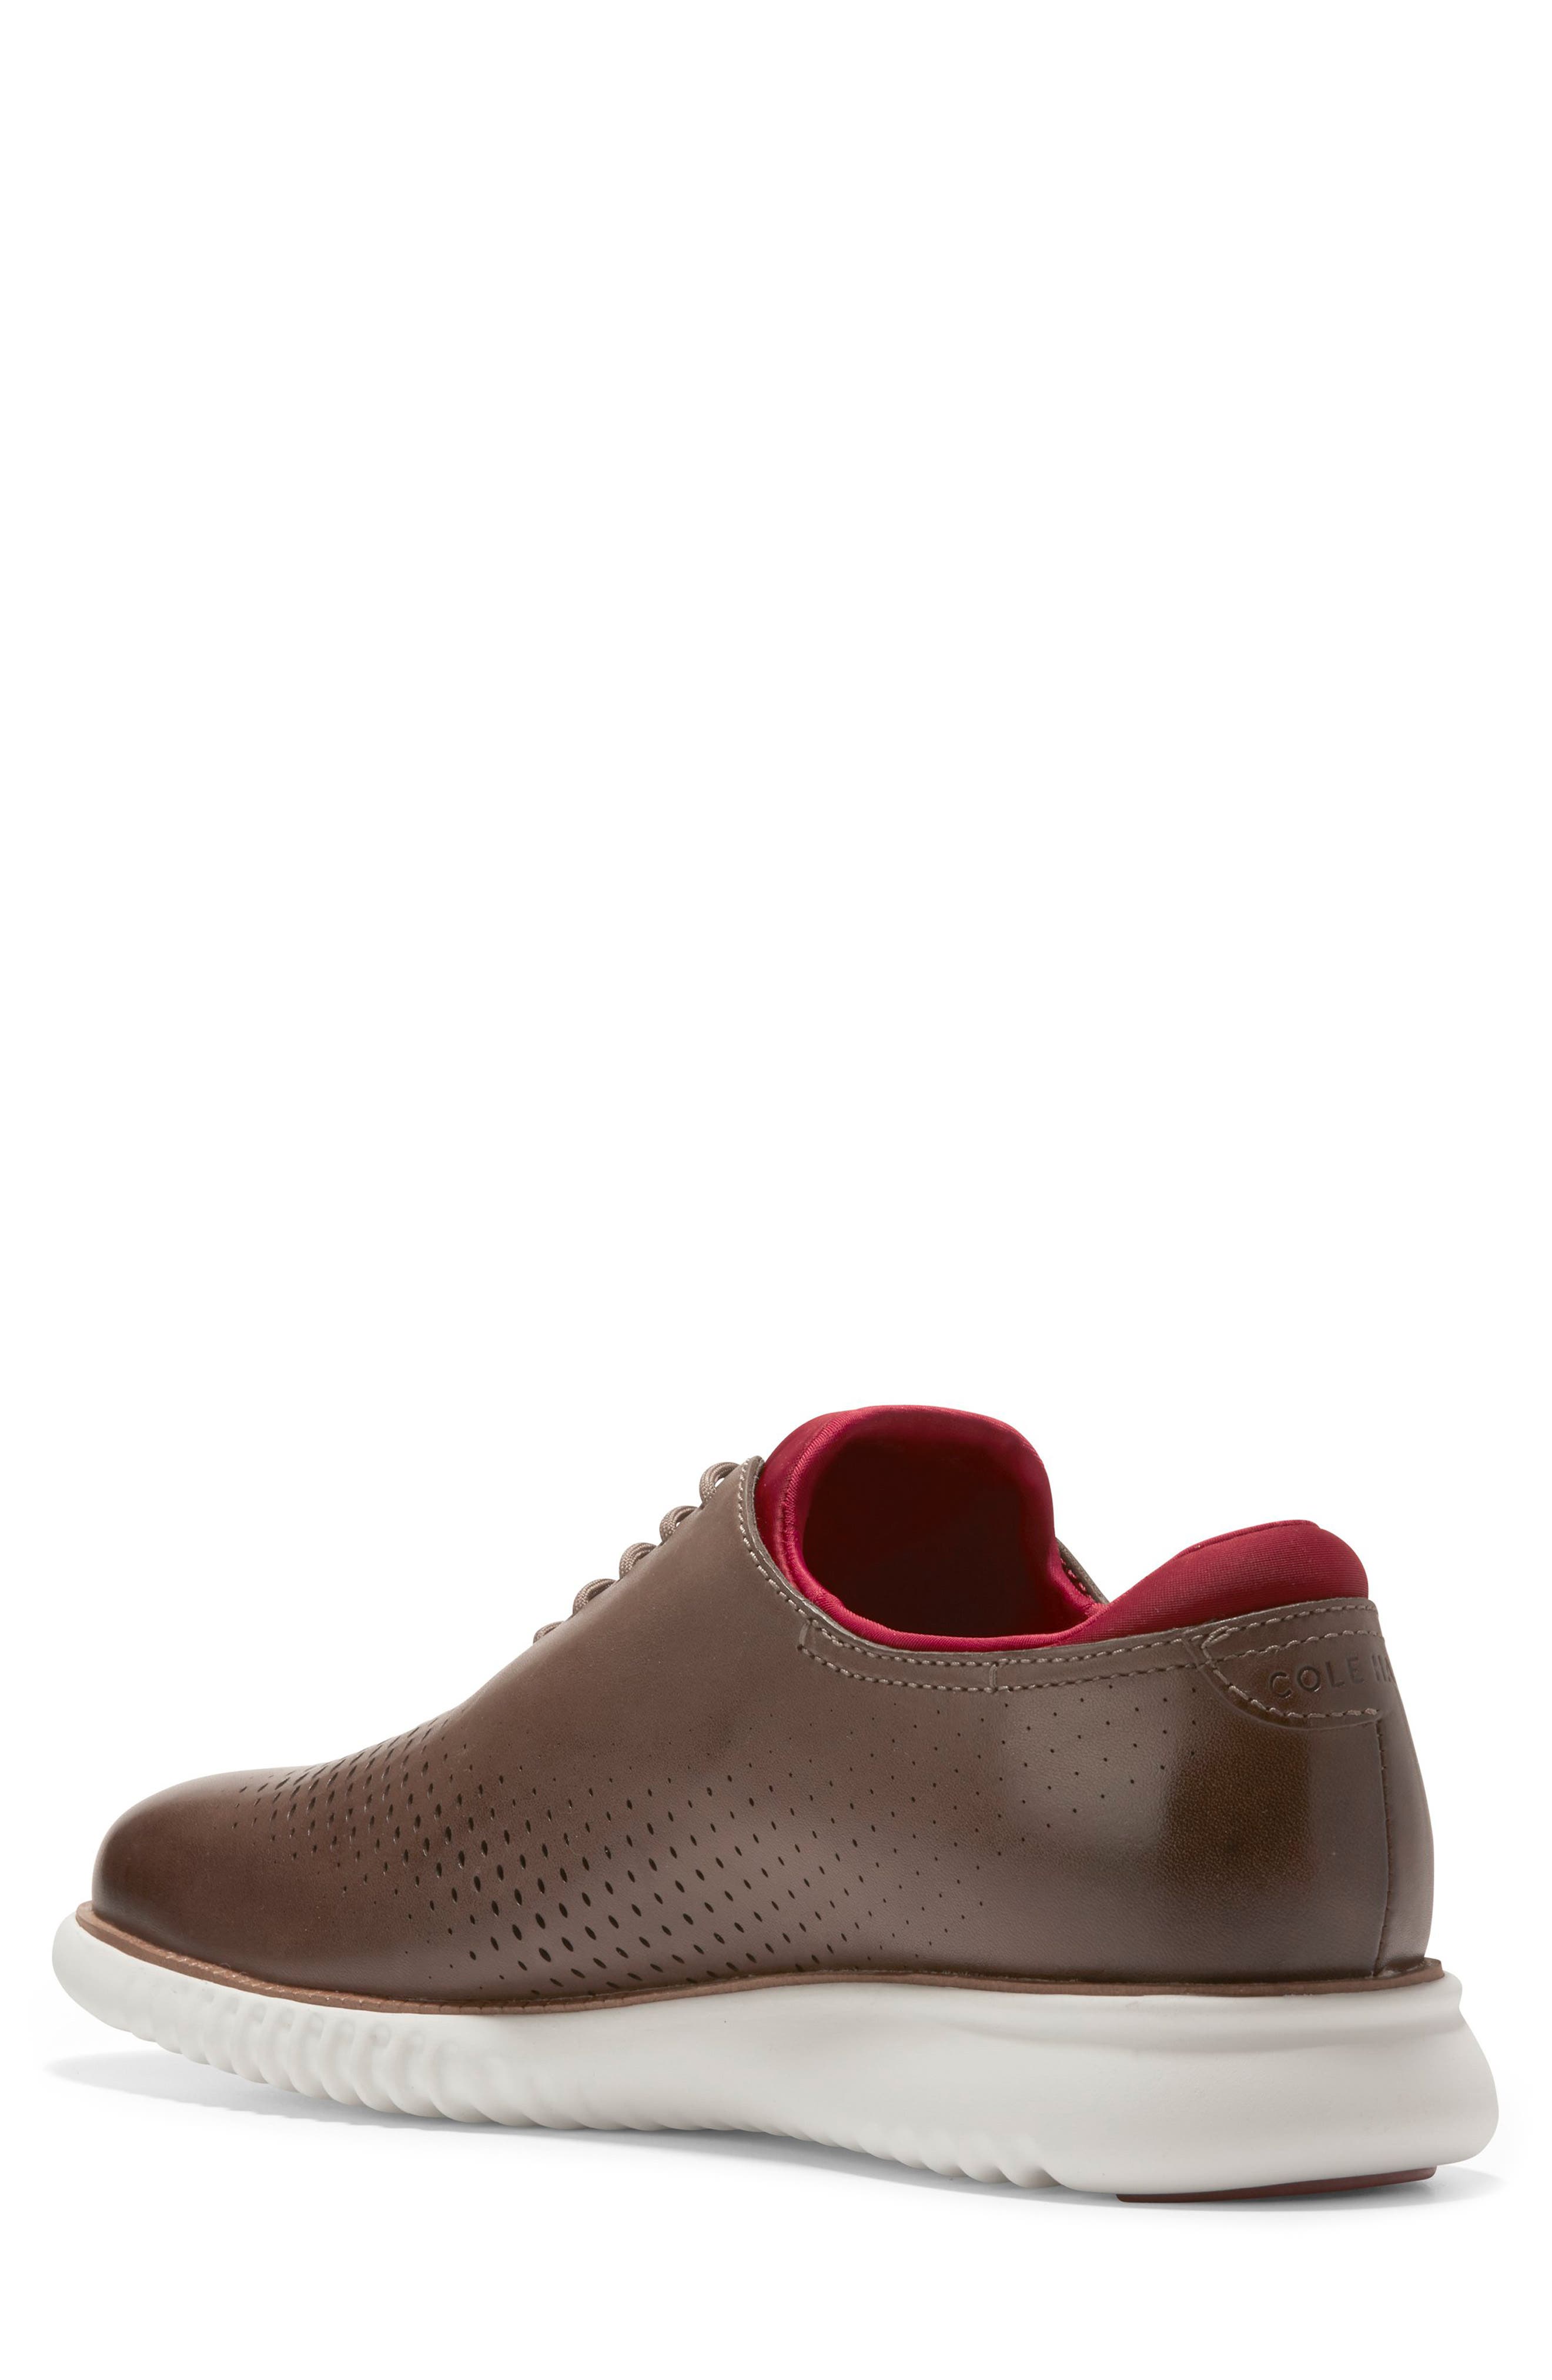 Cole Haan 2.ZeroGrand Laser Wing Oxford in Ch Truffle/Egret 